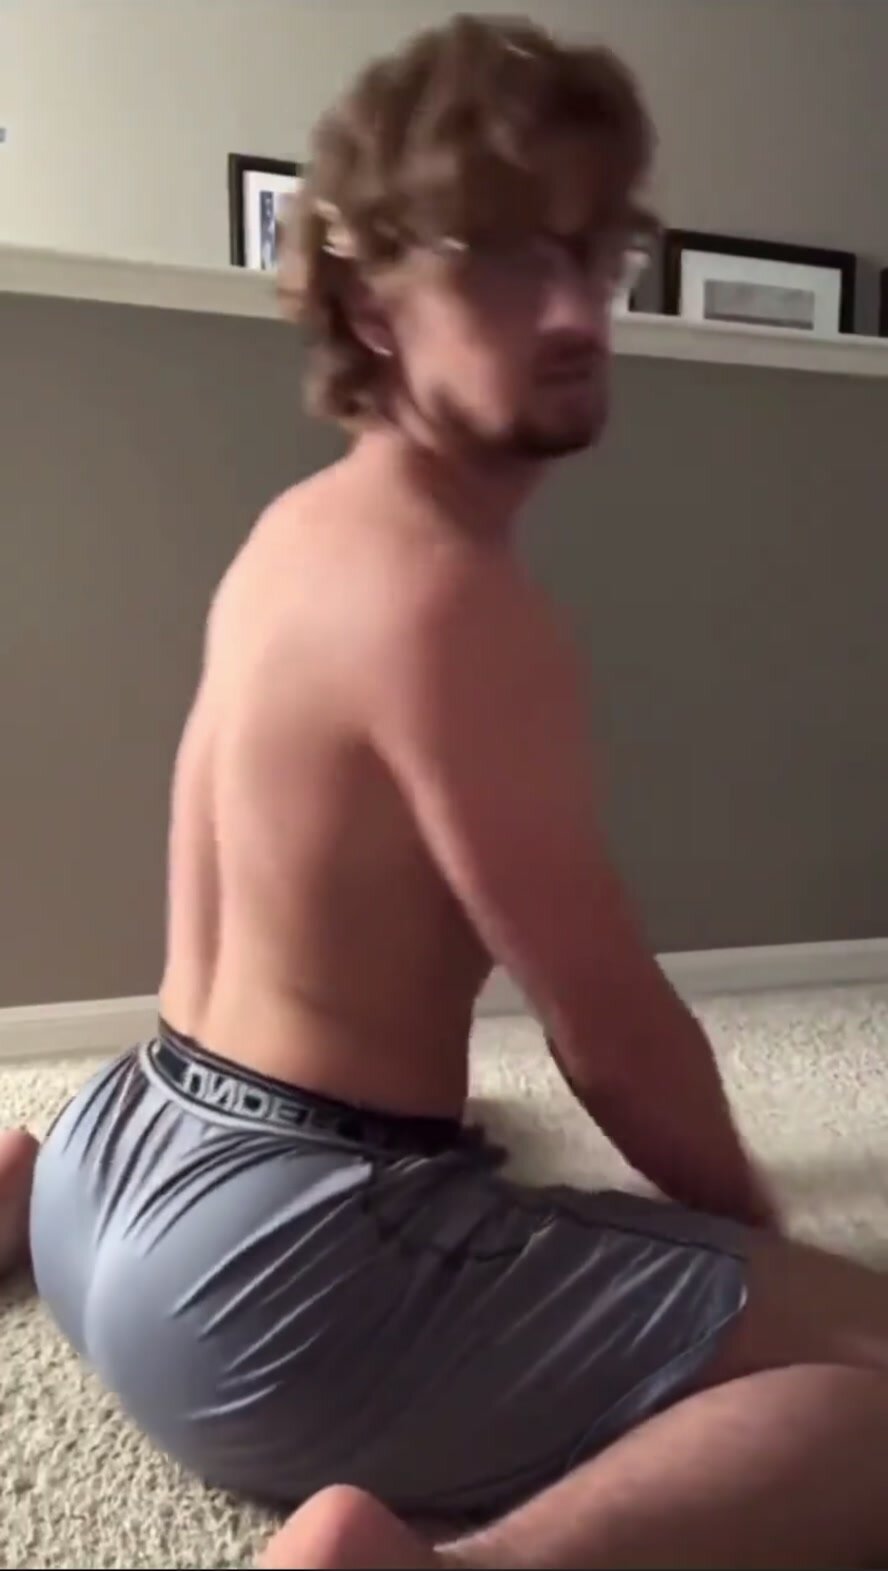 Thicc white guy